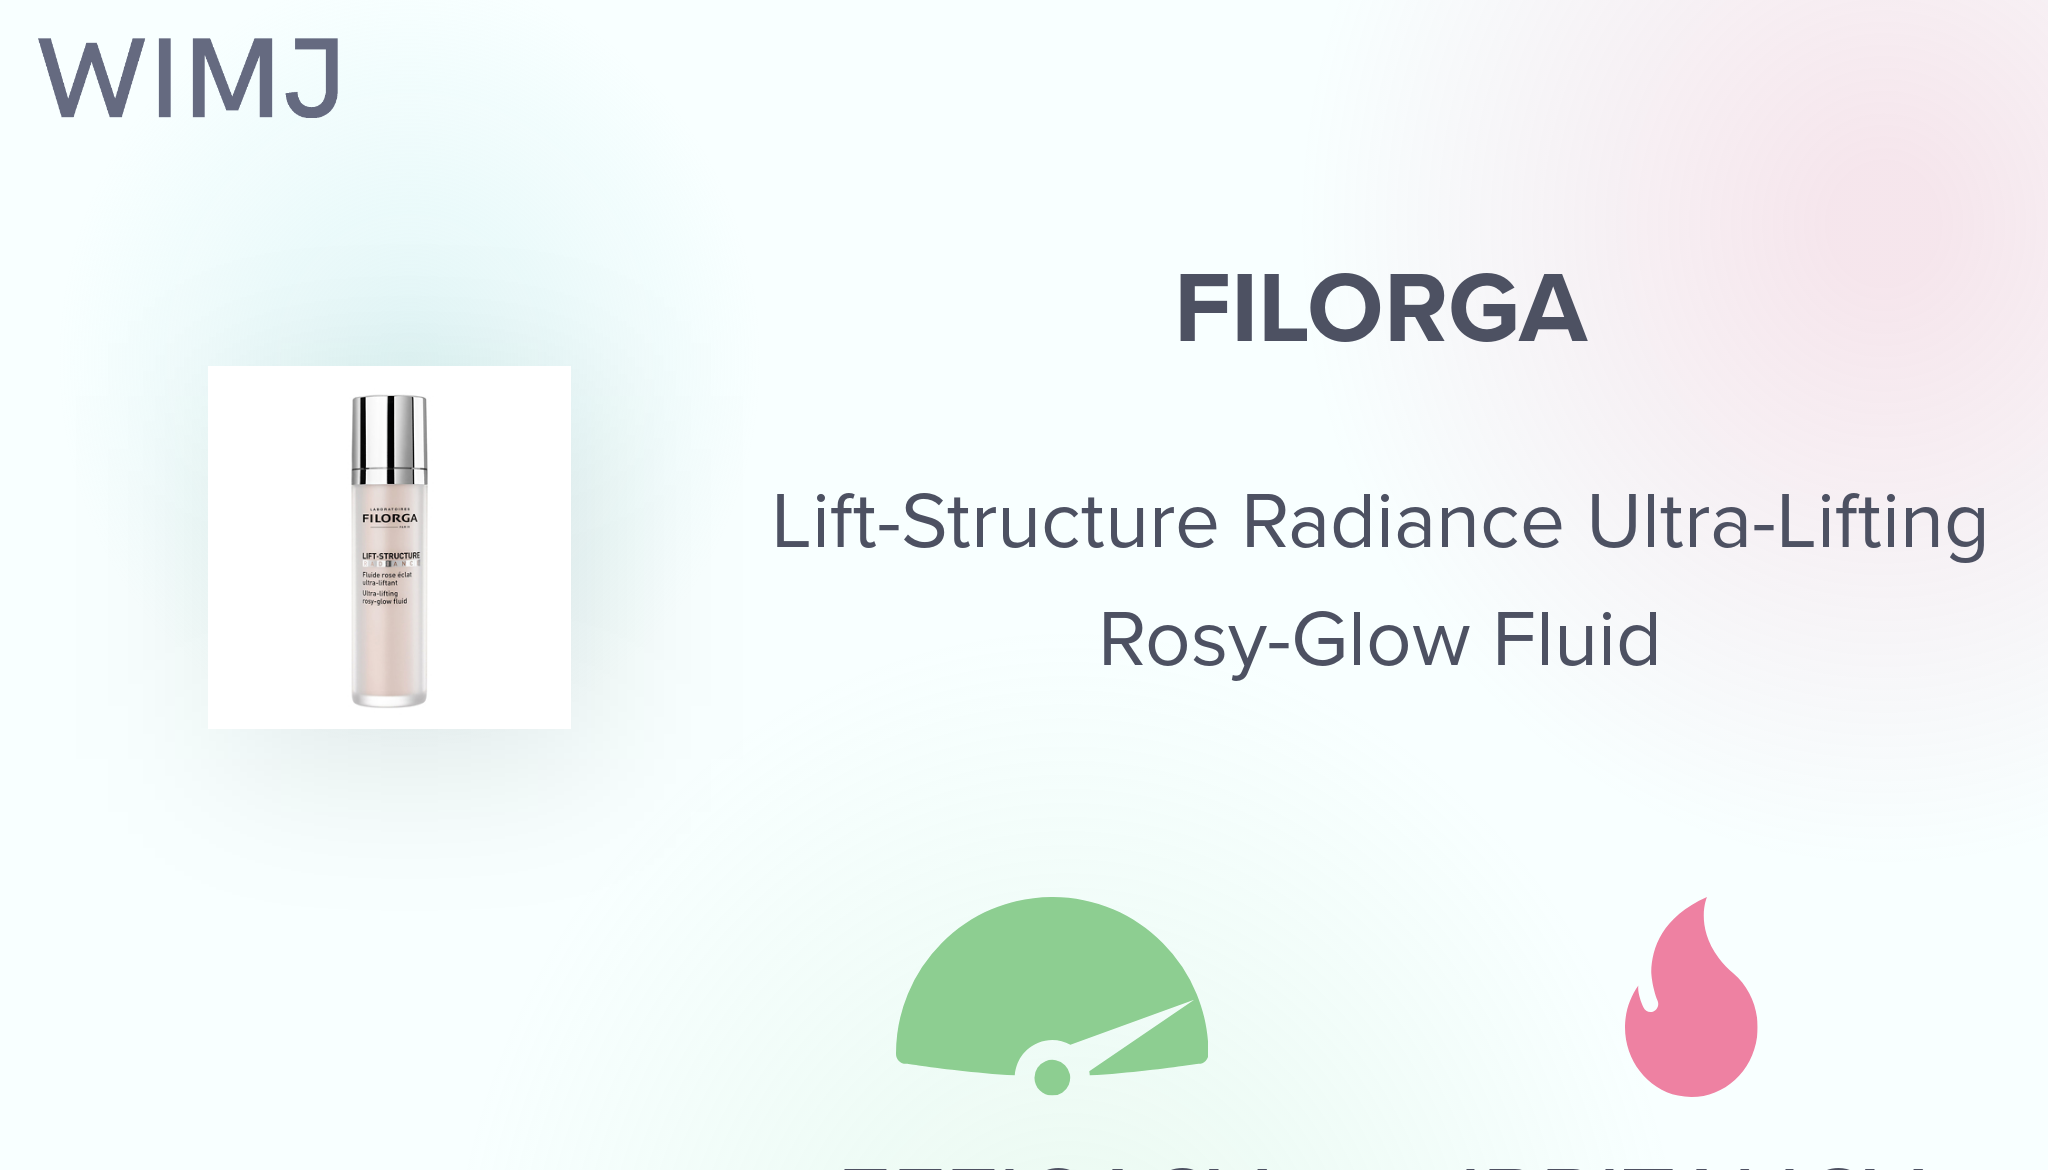 Review: Filorga - Lift-Structure Radiance Ultra-Lifting Rosy-Glow